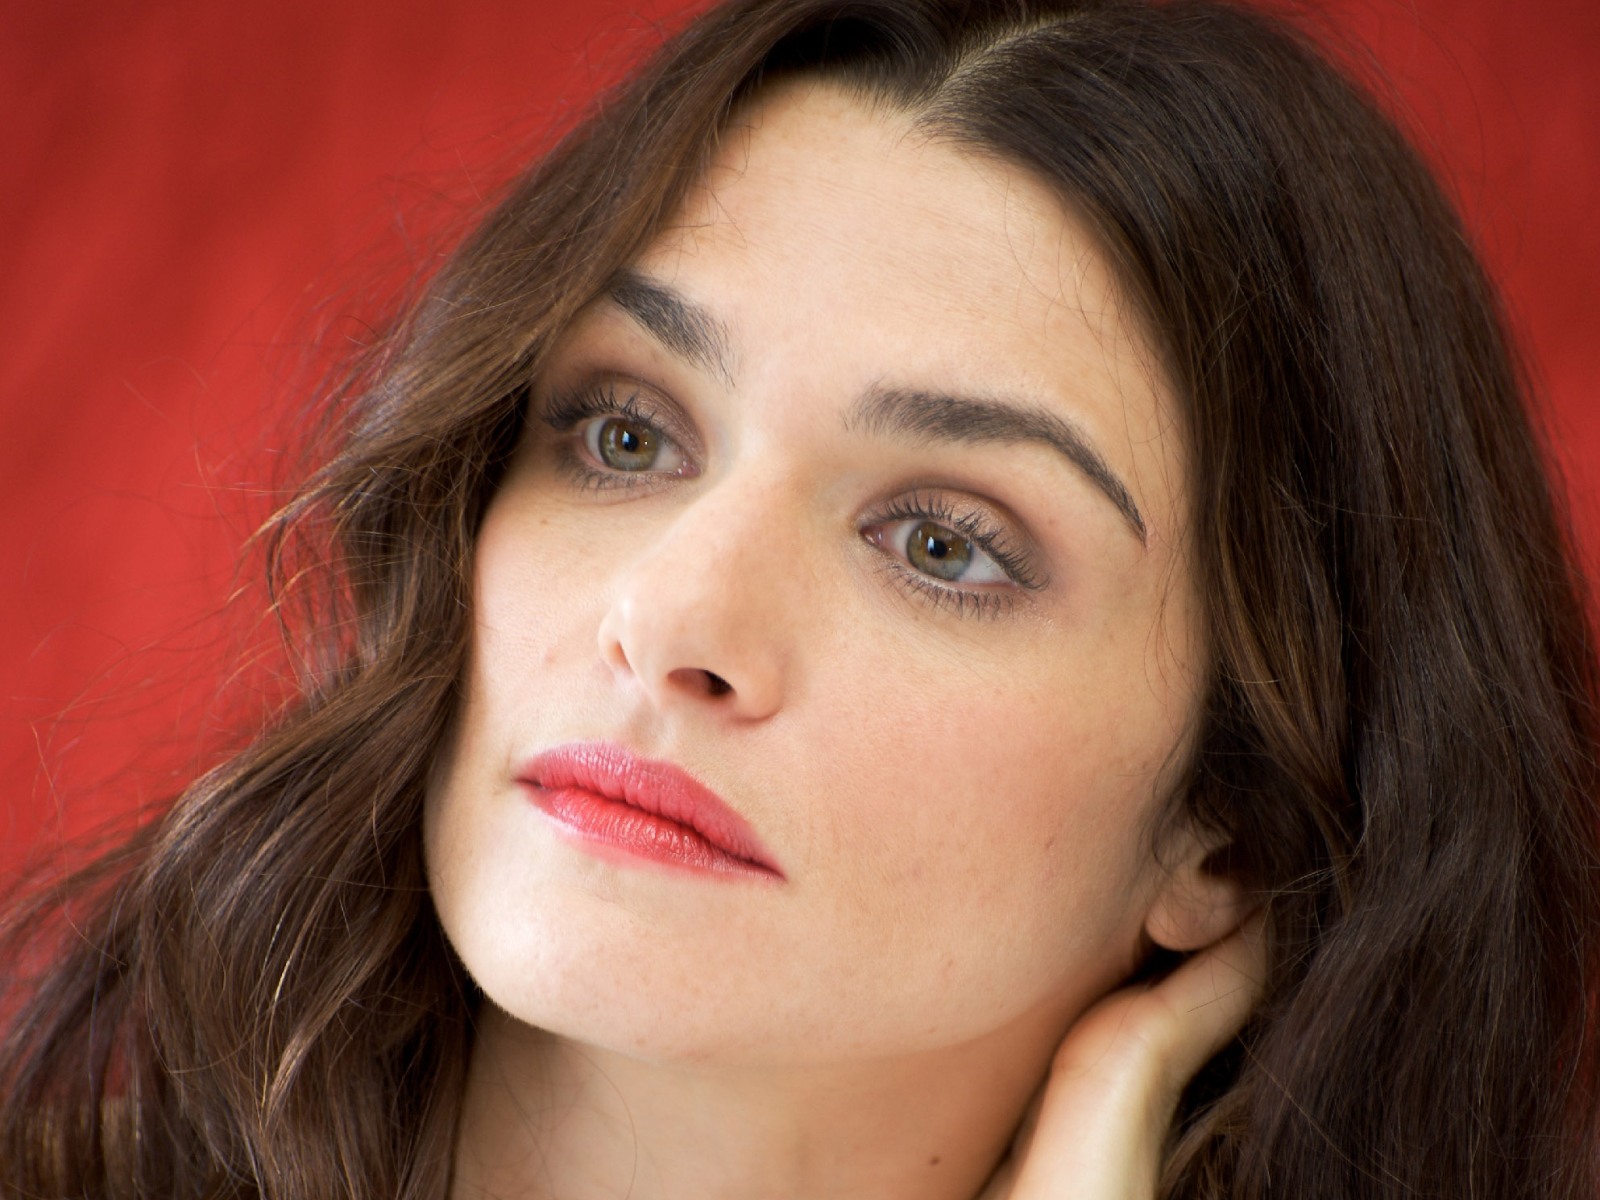 Experts tend to think that Rachel Weisz could indeed be using fillers as well as Botox. When close comparisons of her photos is done, the young look is ...